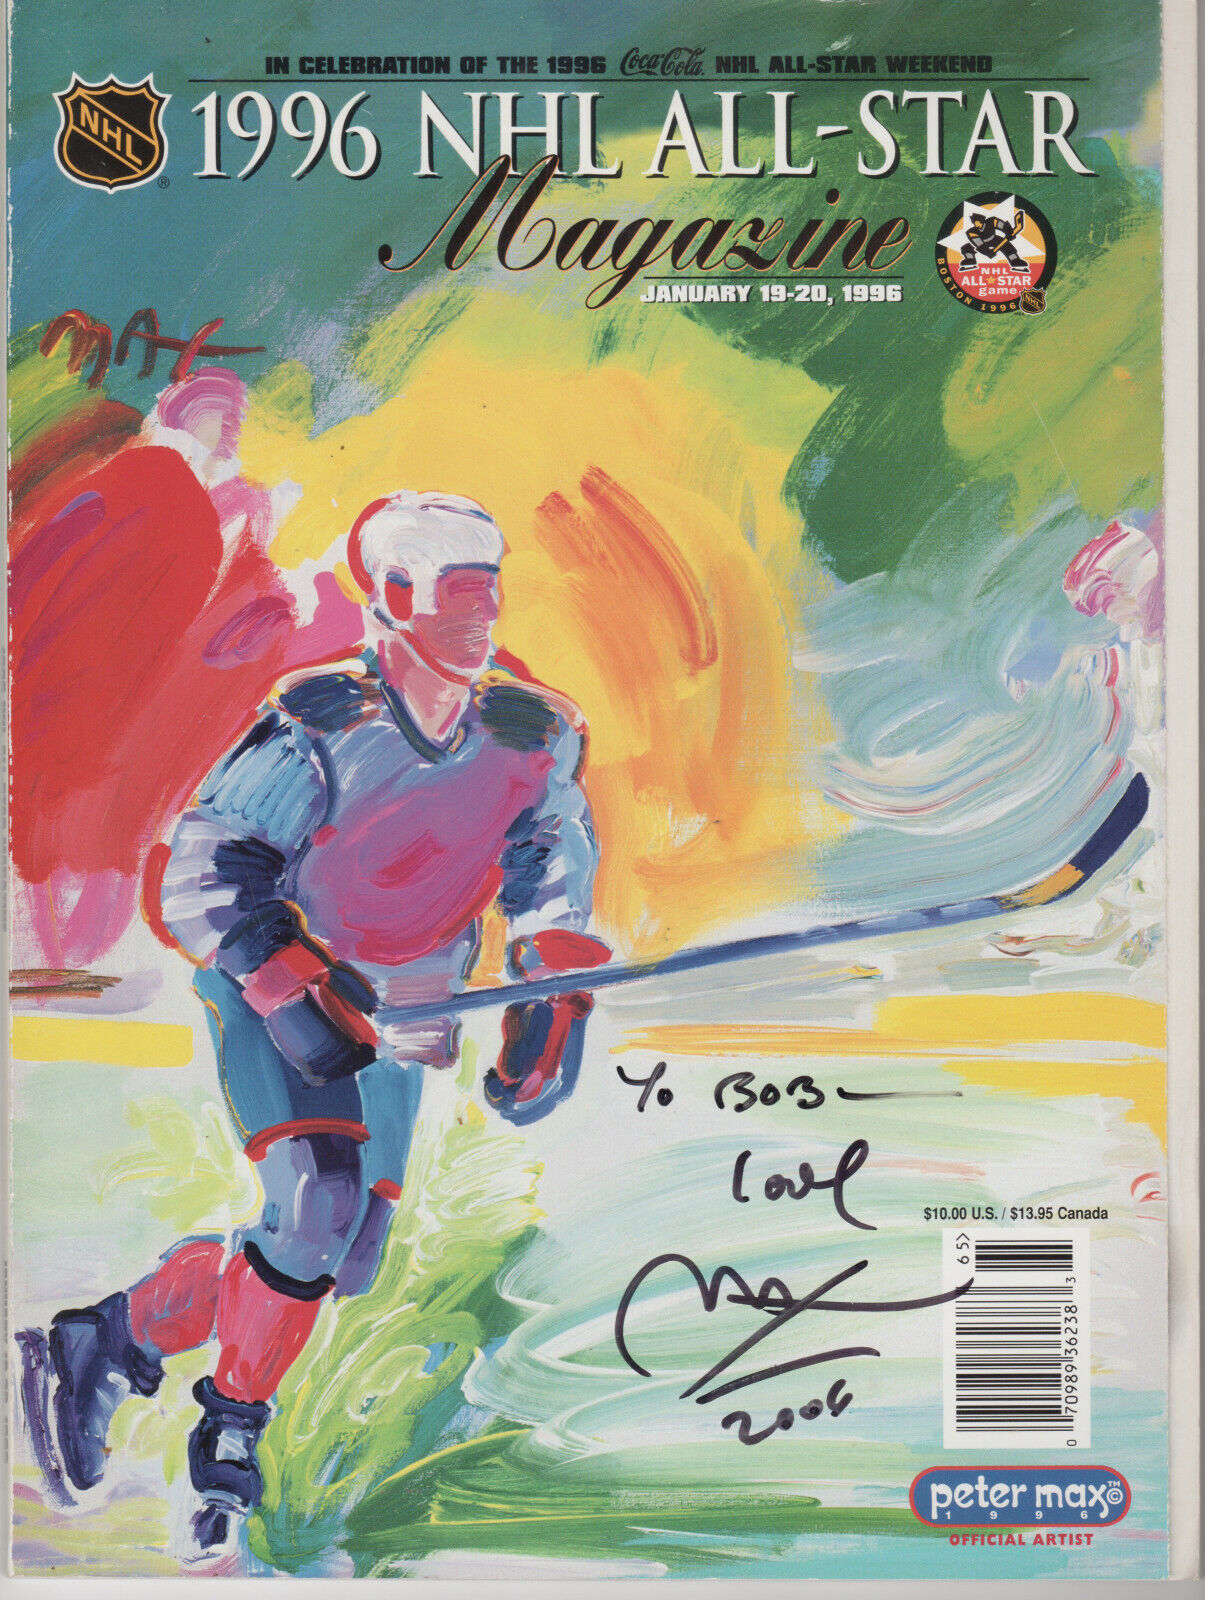 PETER MAX Hand Signed Autograph / 1996 NHL All-Star Magazine